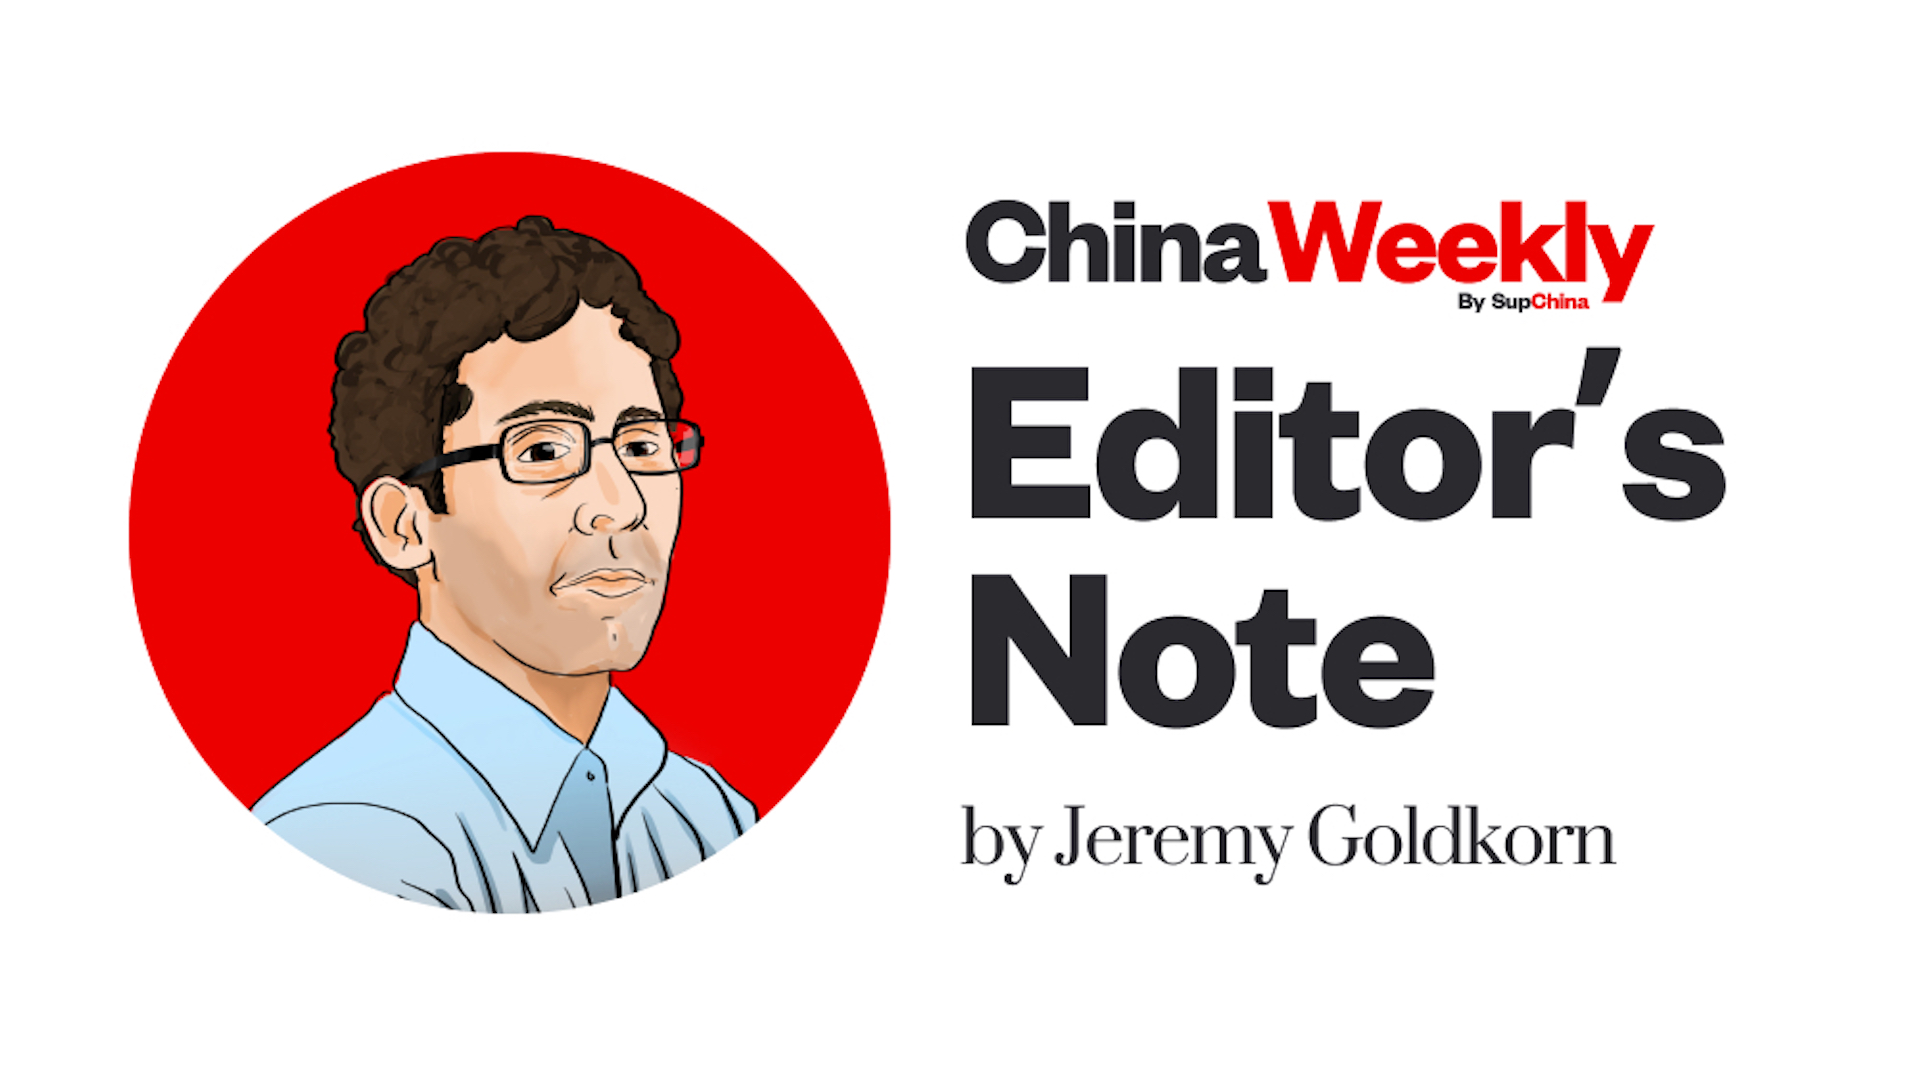 Weekly Editors Note Jeremy Goldkorn illustration red background